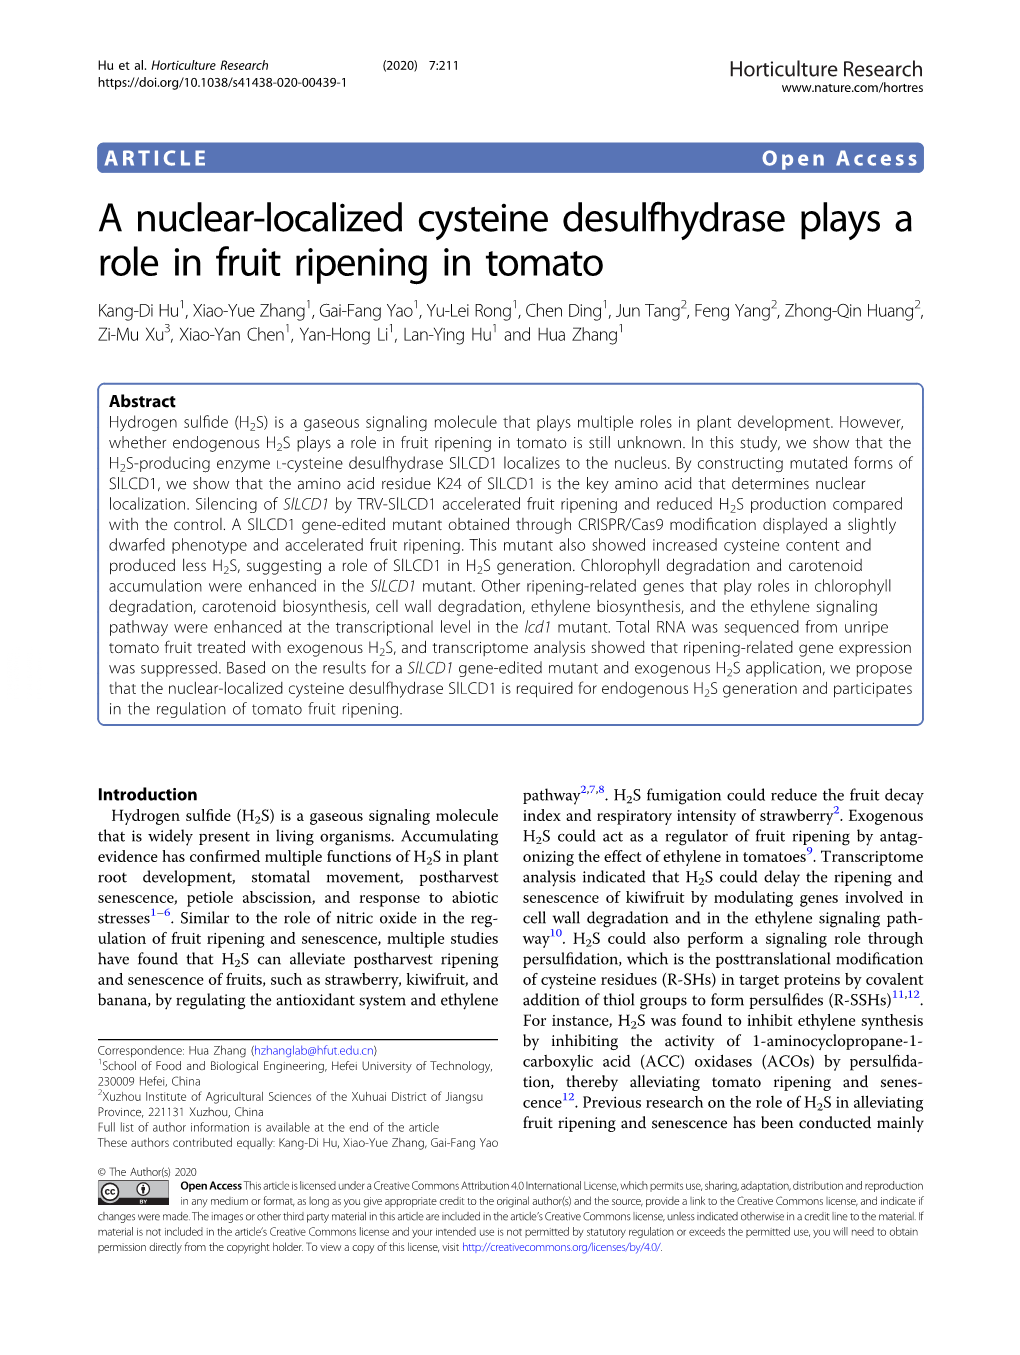 A Nuclear-Localized Cysteine Desulfhydrase Plays a Role in Fruit